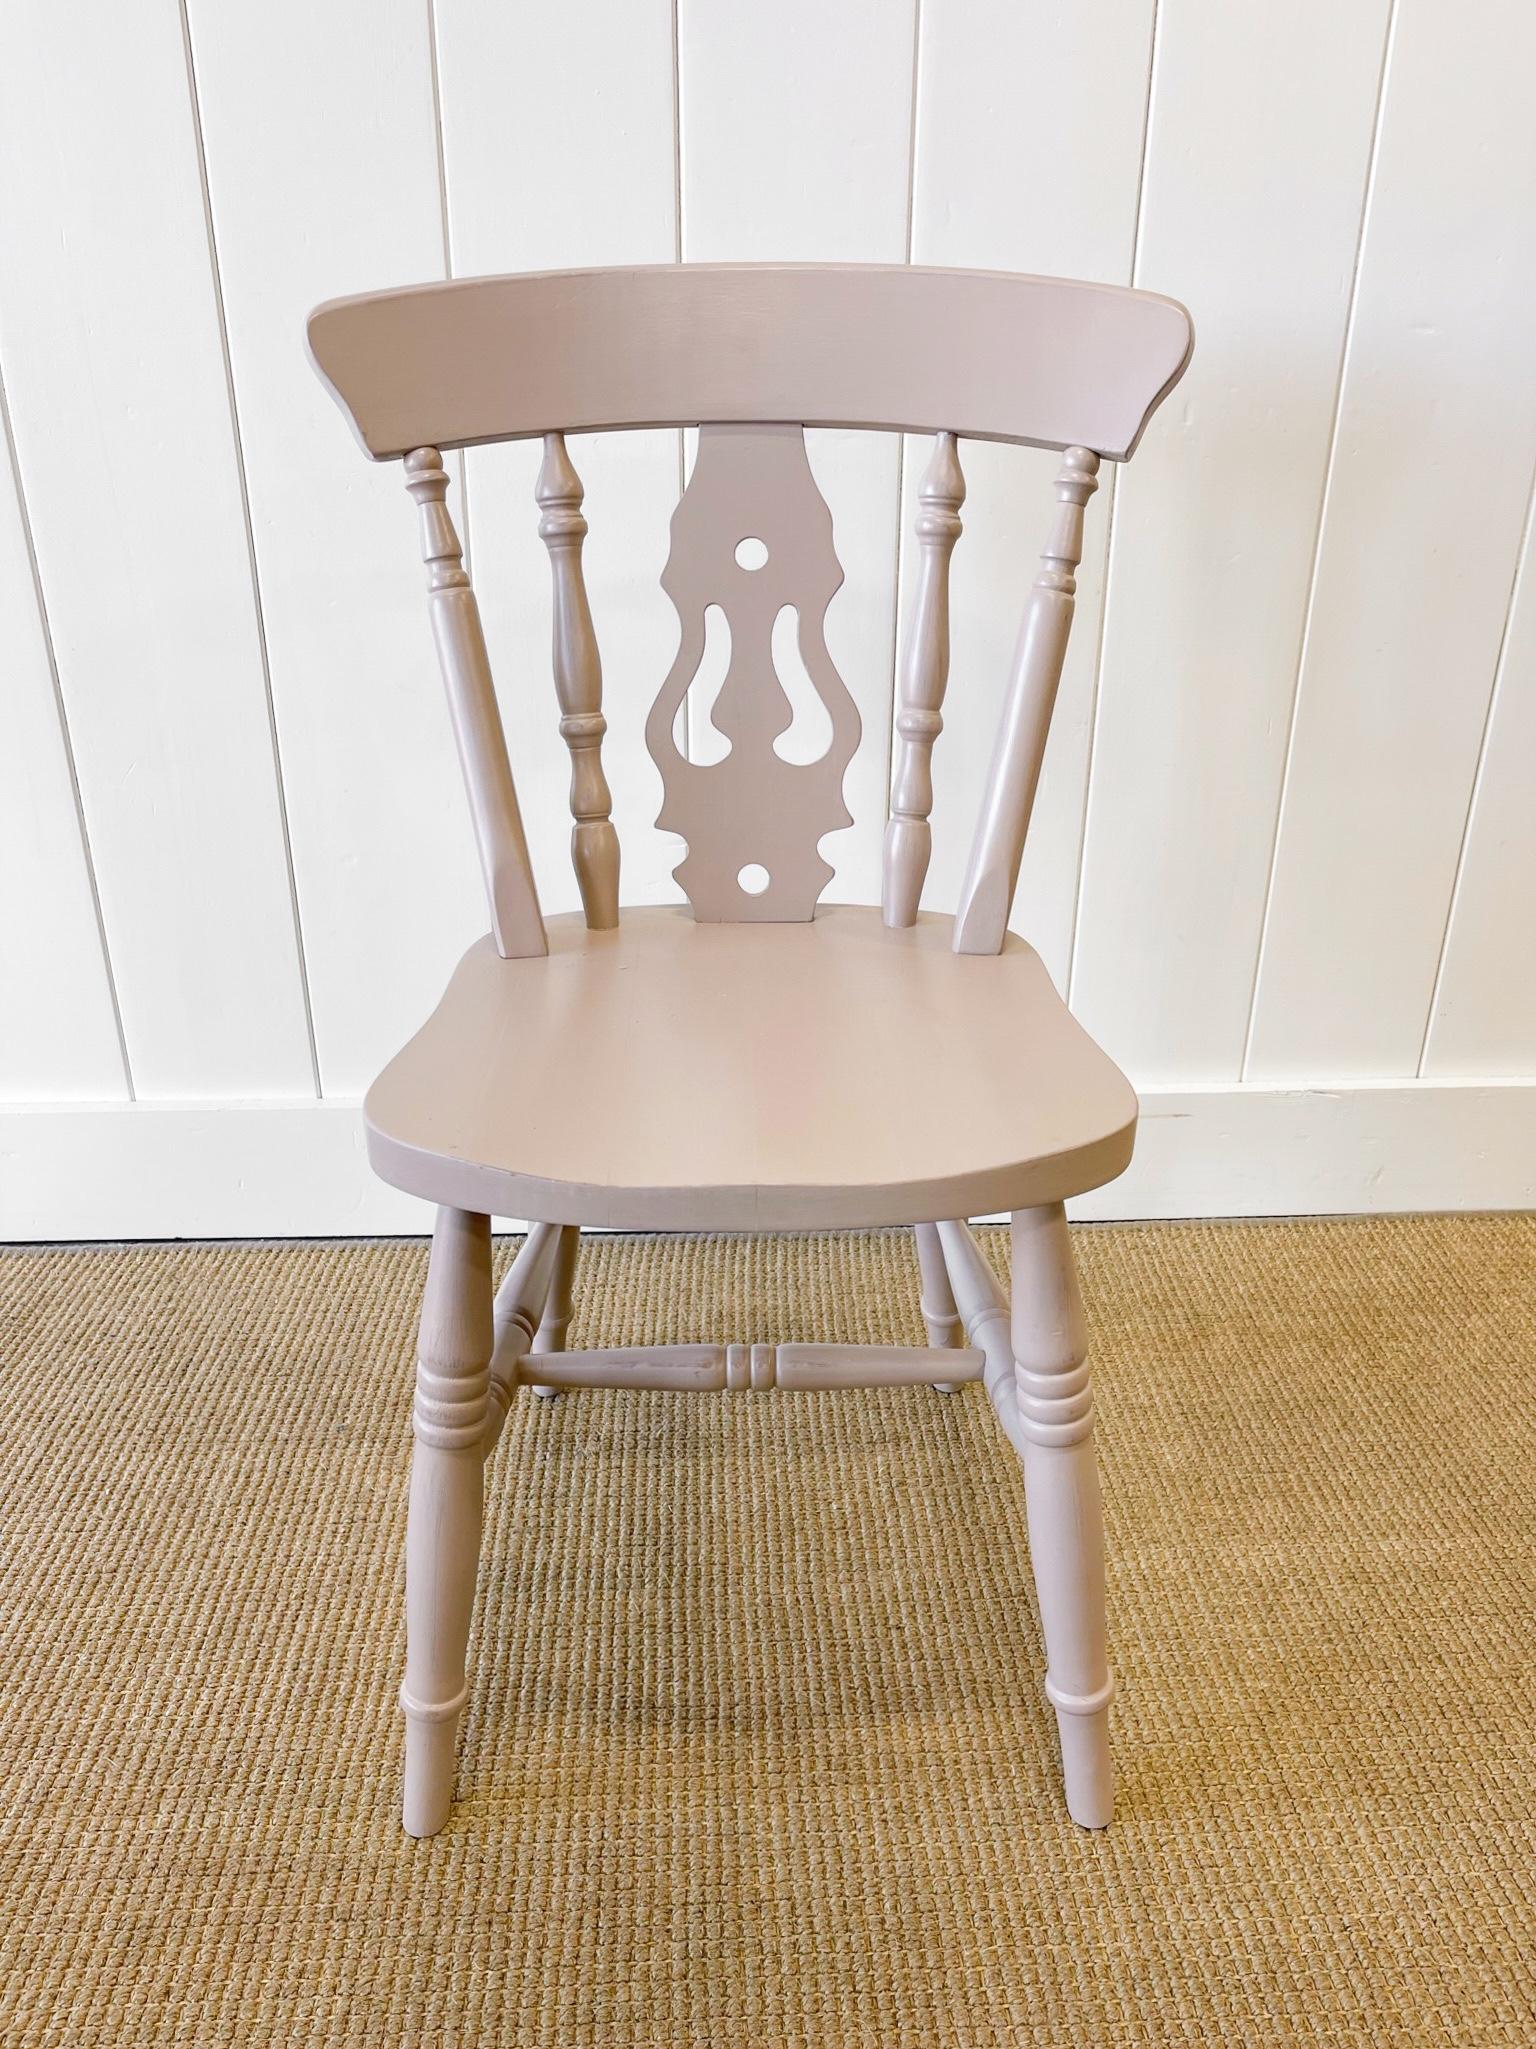 A Vintage Set of 4 Taupe Farmhouse Fiddleback Chairs In Good Condition For Sale In Oak Park, MI